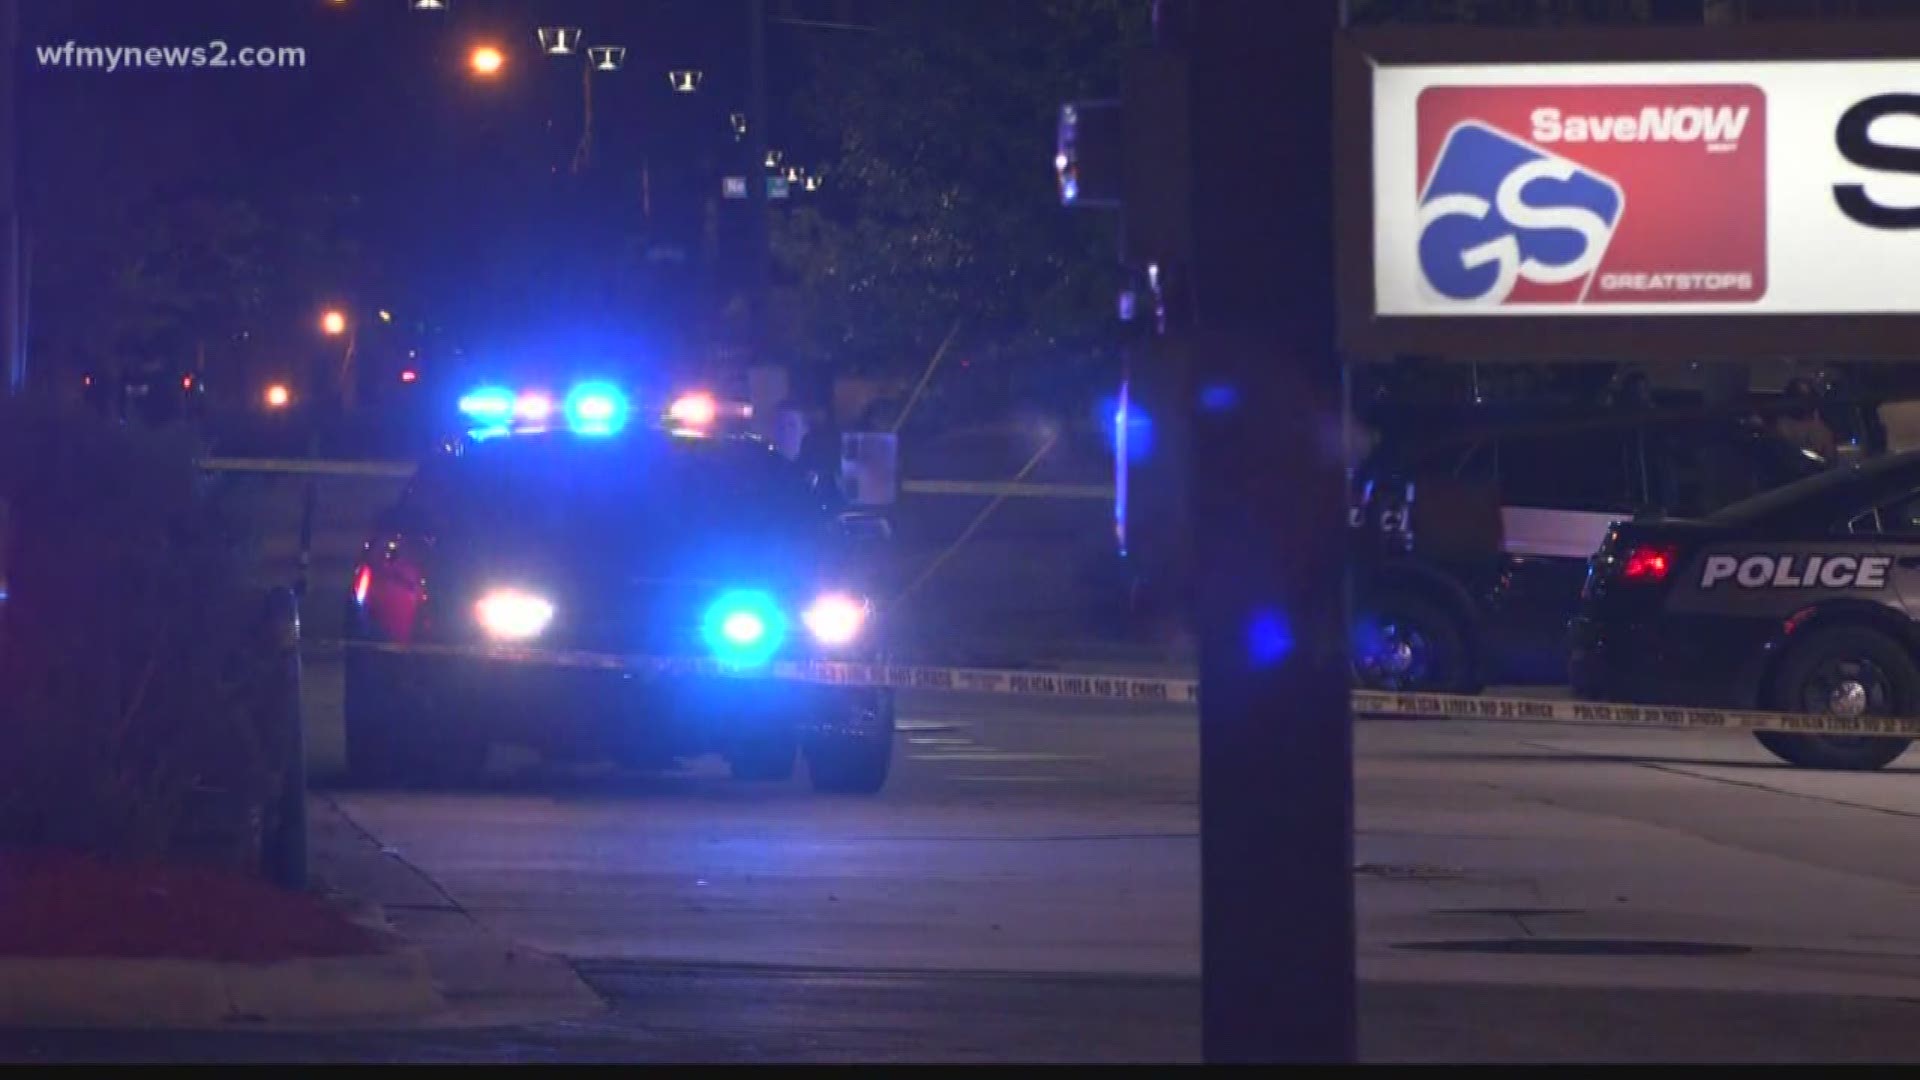 Police are searching for two suspects after they say one person was shot in the leg.